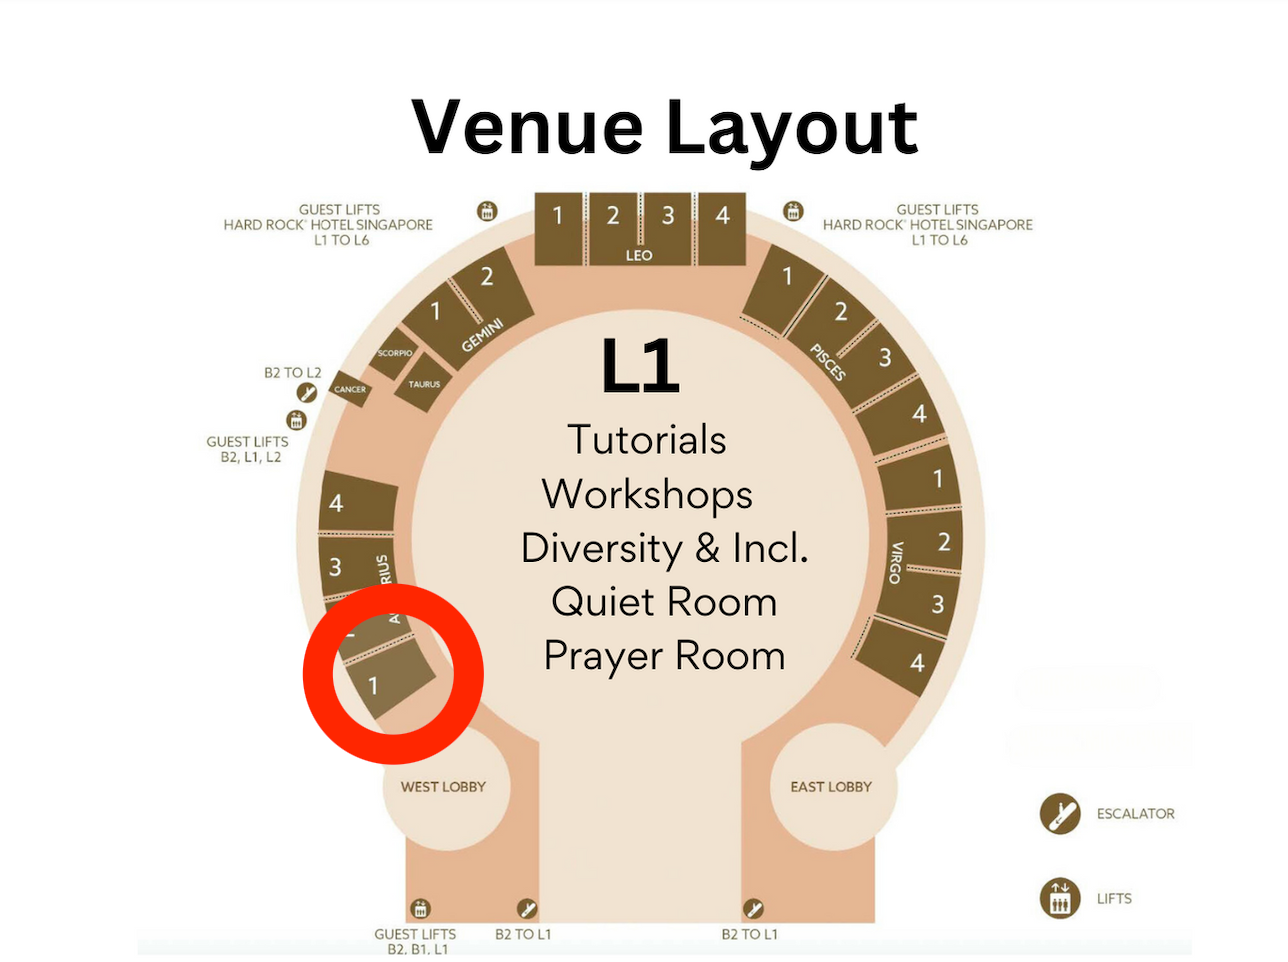 Detailed venue layout with labeled sections for tutorials, workshops, diversity, quiet and prayer rooms